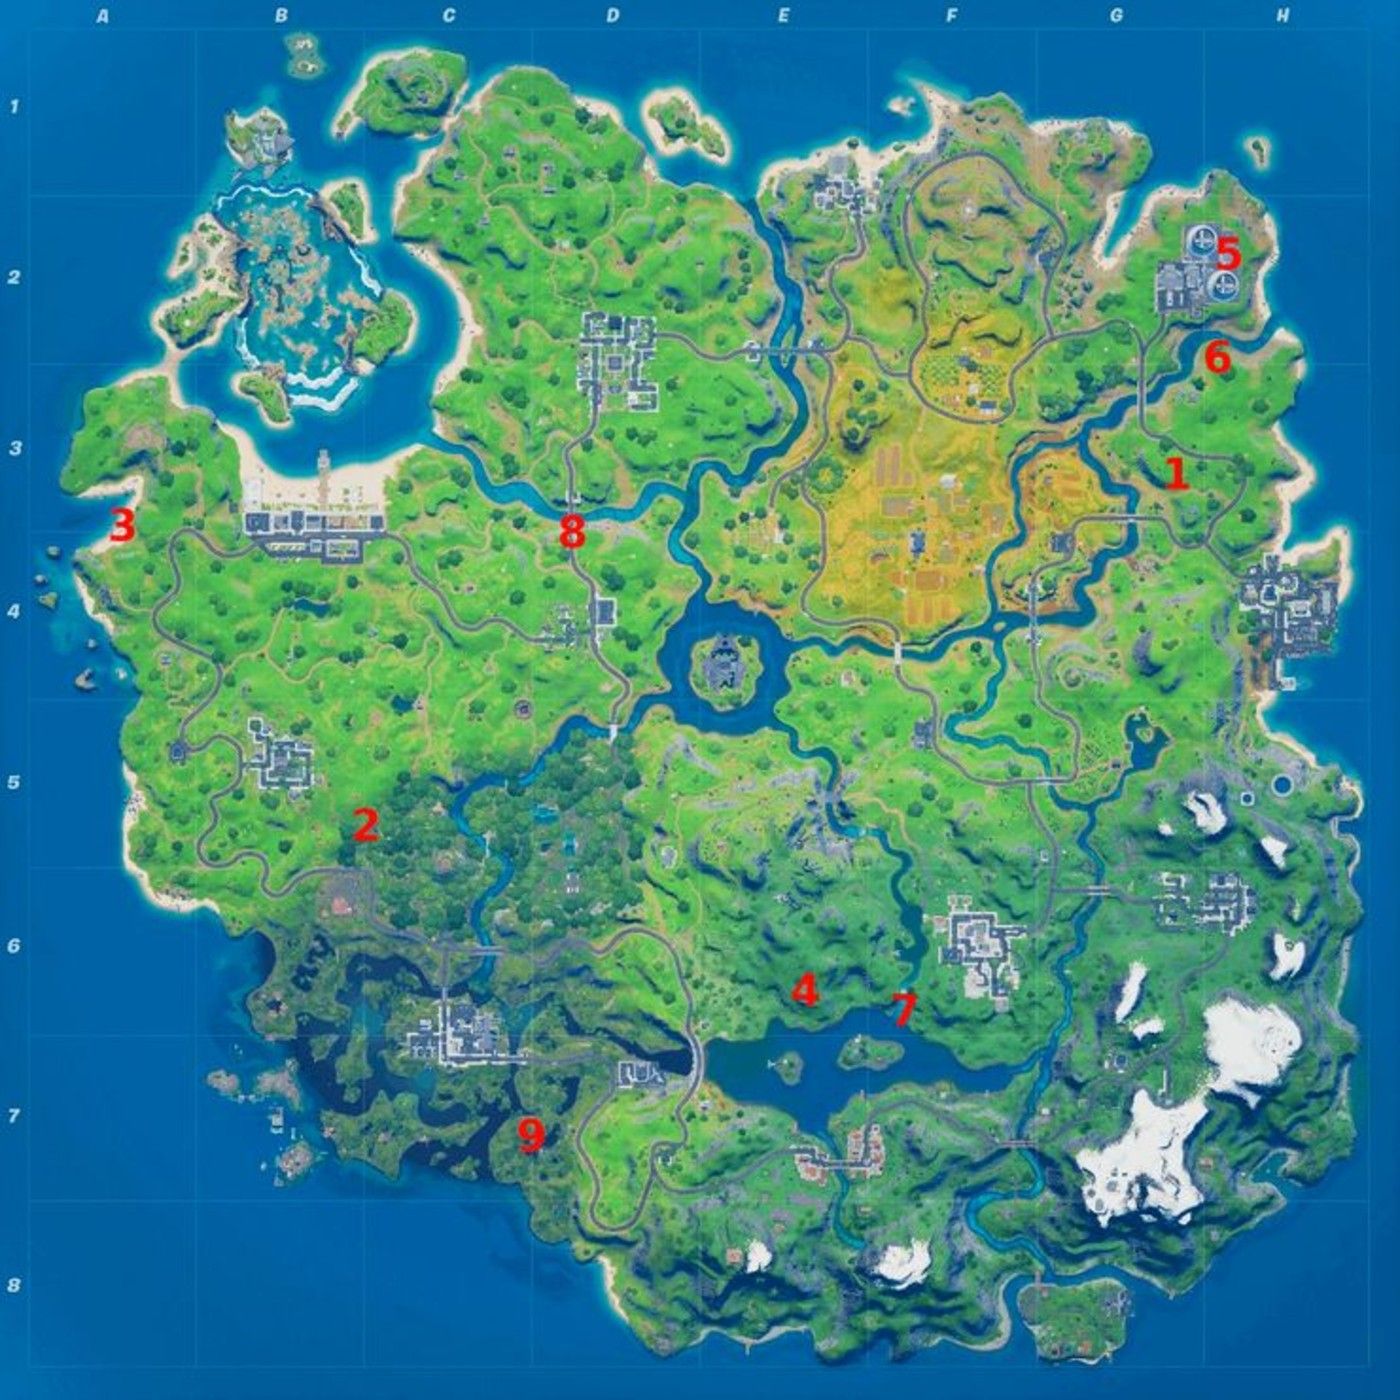 All the locations for XP Coins for Week 1 of Season 4 in Fortnite